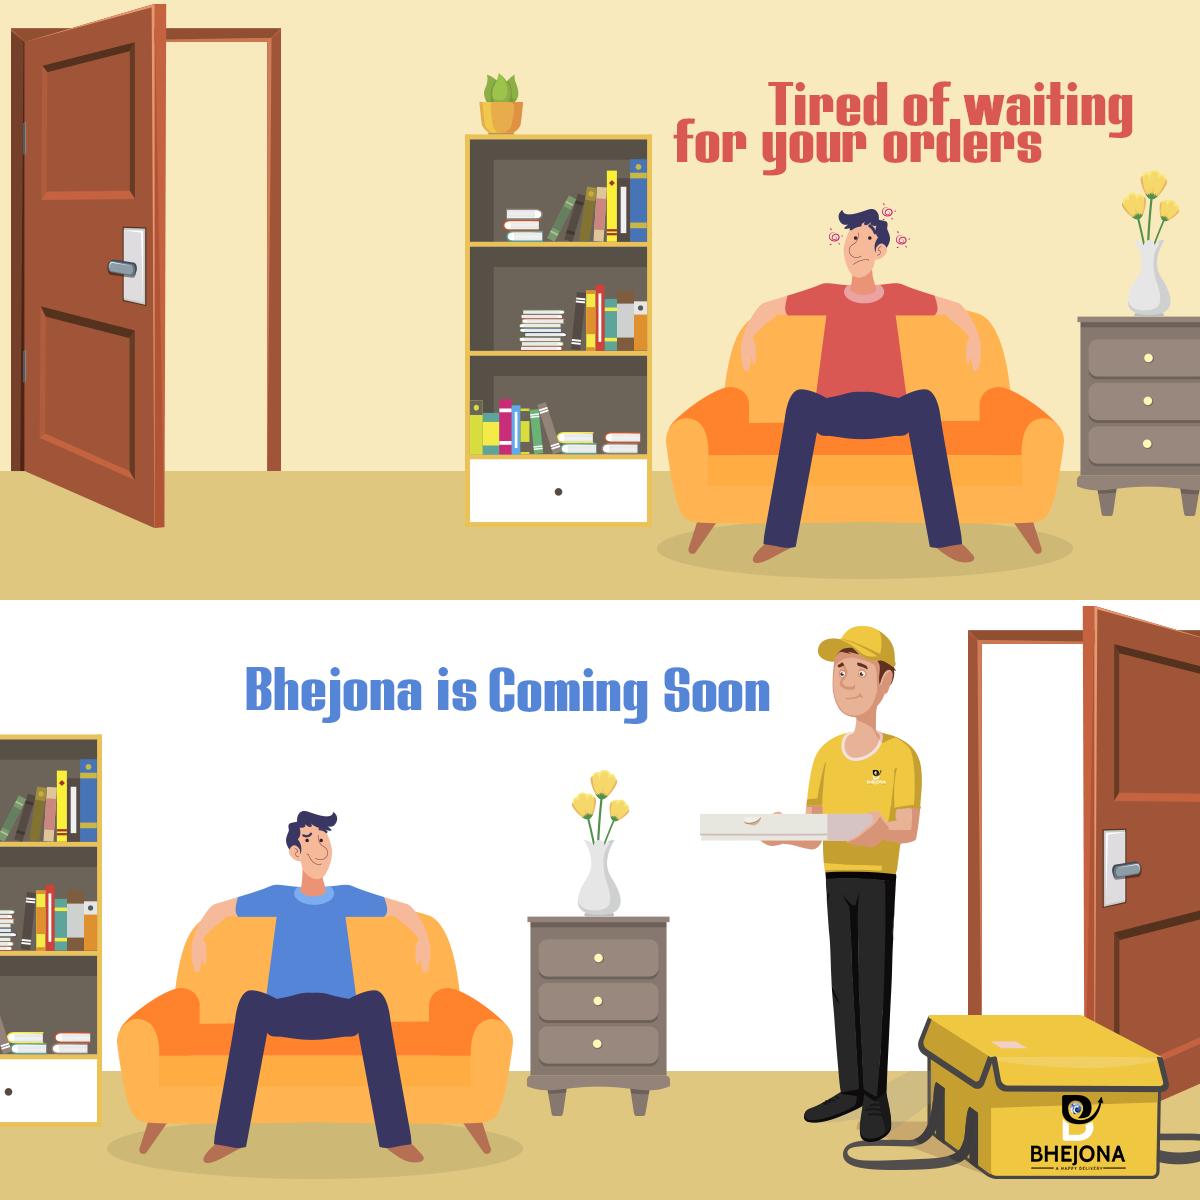 Endless waiting for your orders is about to end.

Bhejona is Coming Soon!
#FastDelivery #homedelivery #comingsoon #gurgaon #shopping #food #grocery #onlinepayments #Savetime #easyuse #happydelivery